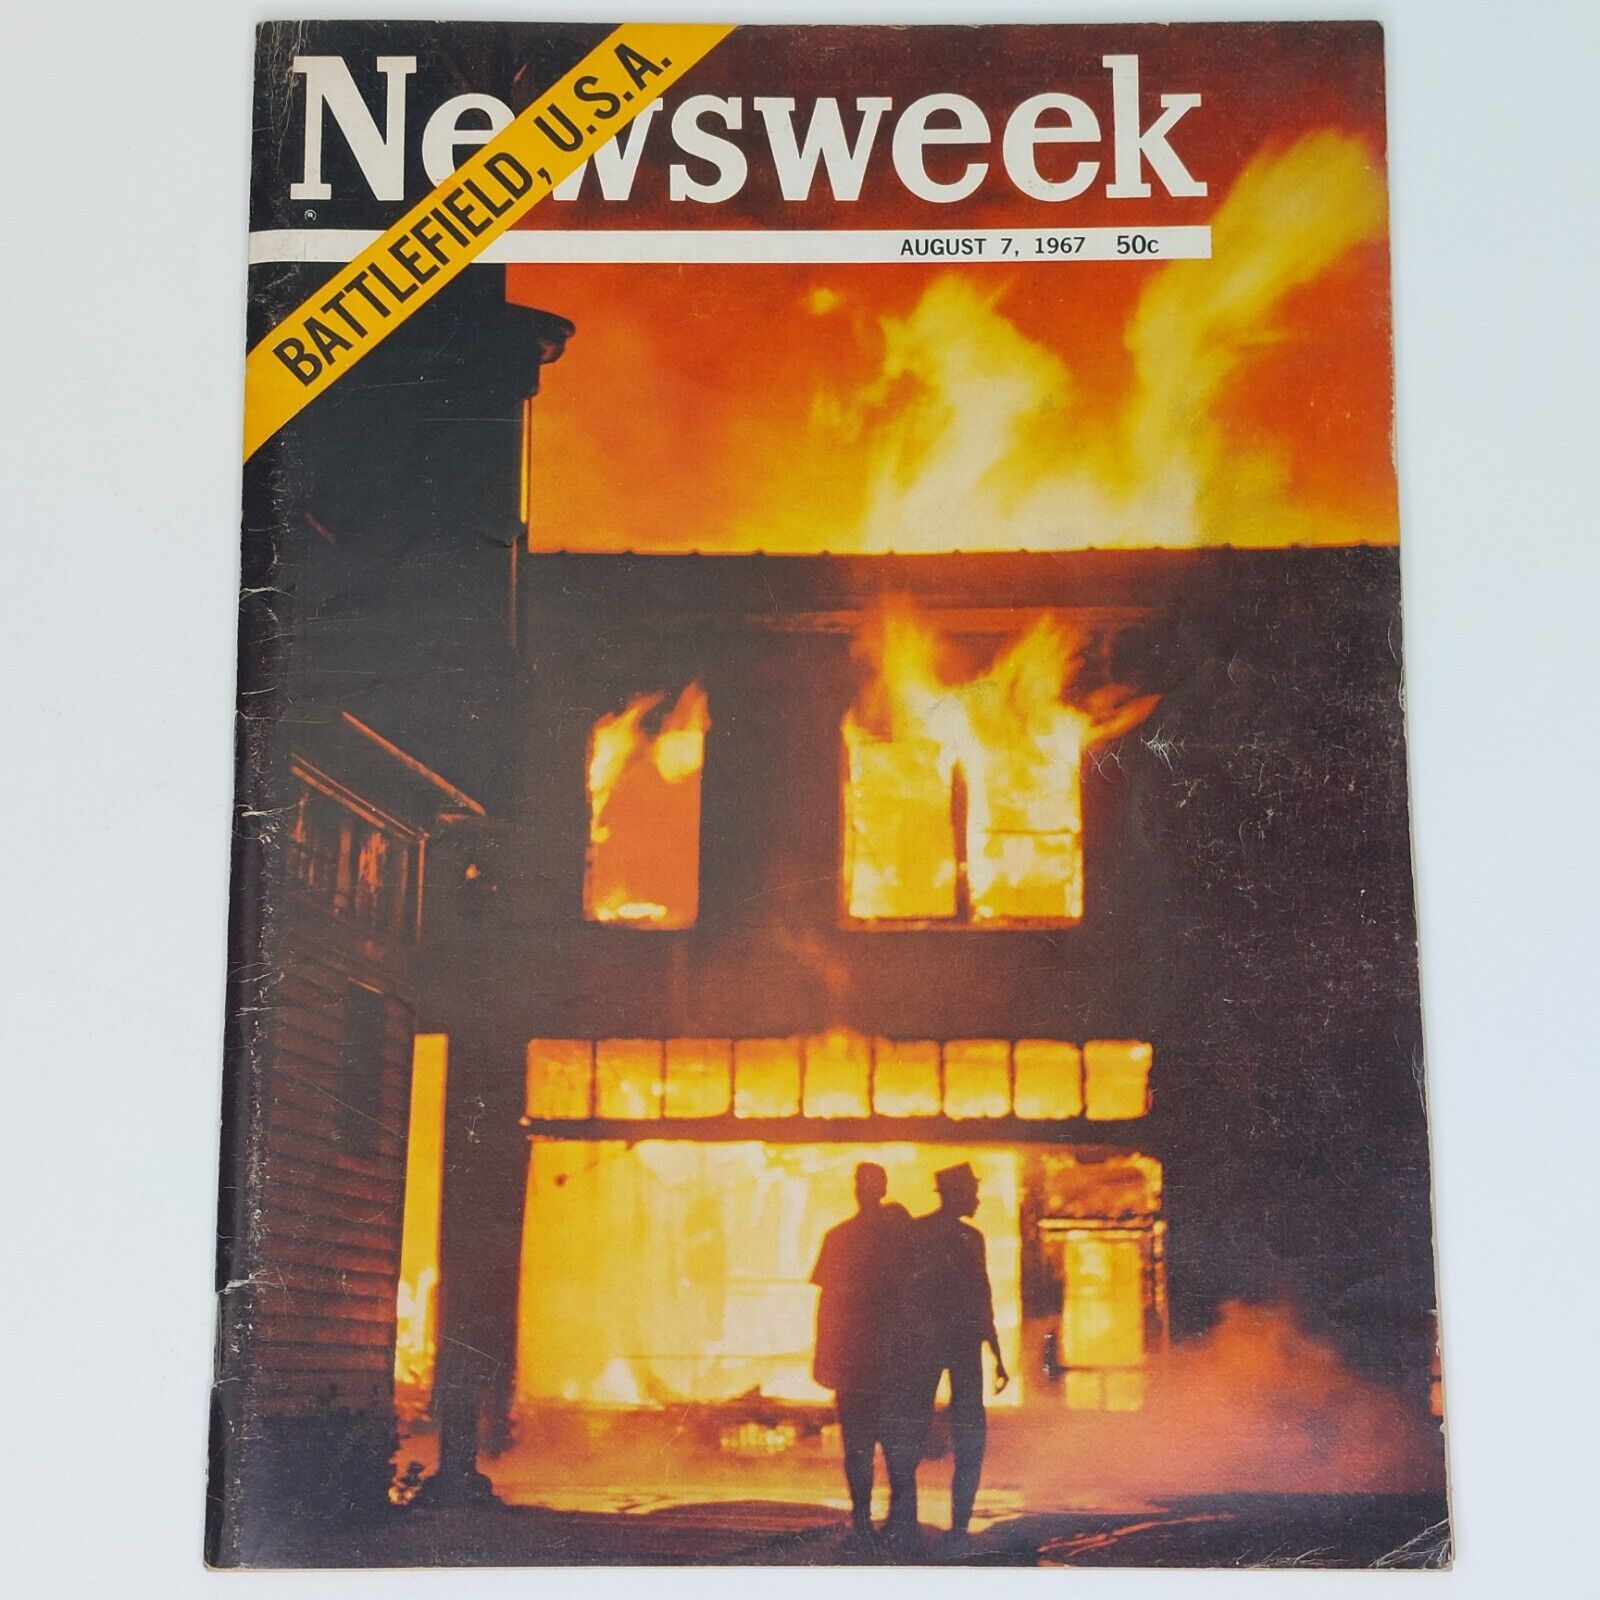 Collectors Vintage Newsweek August 7 1967 Excellent Preowned Condition